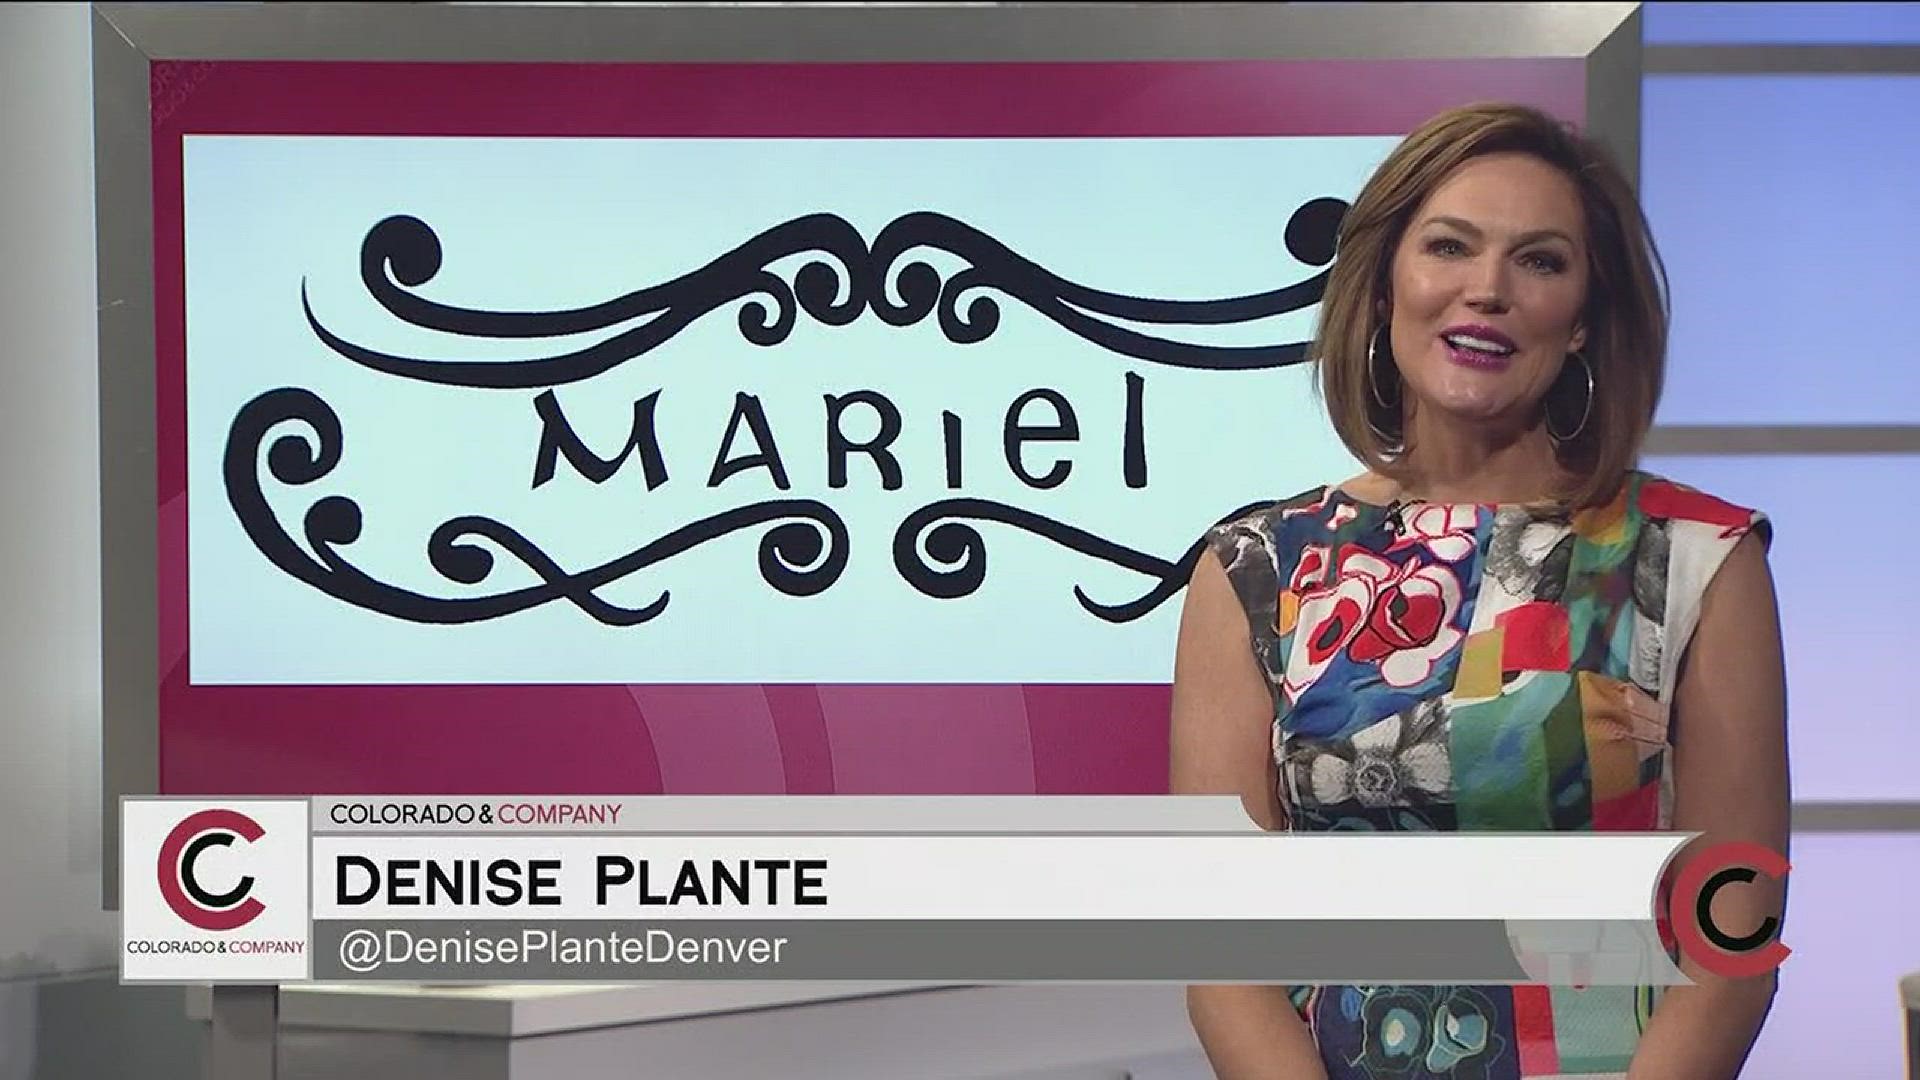 Mariel has the largest collection of designer hats in Denver. Make a statement at any derby party, luncheon or special event with a hat or fascinator from Mariel Boutique. 
THIS INTERVIEW HAS COMMERCIAL CONTENT. PRODUCTS AND SERVICES FEATURED APPEAR AS PAID ADVERTISING.